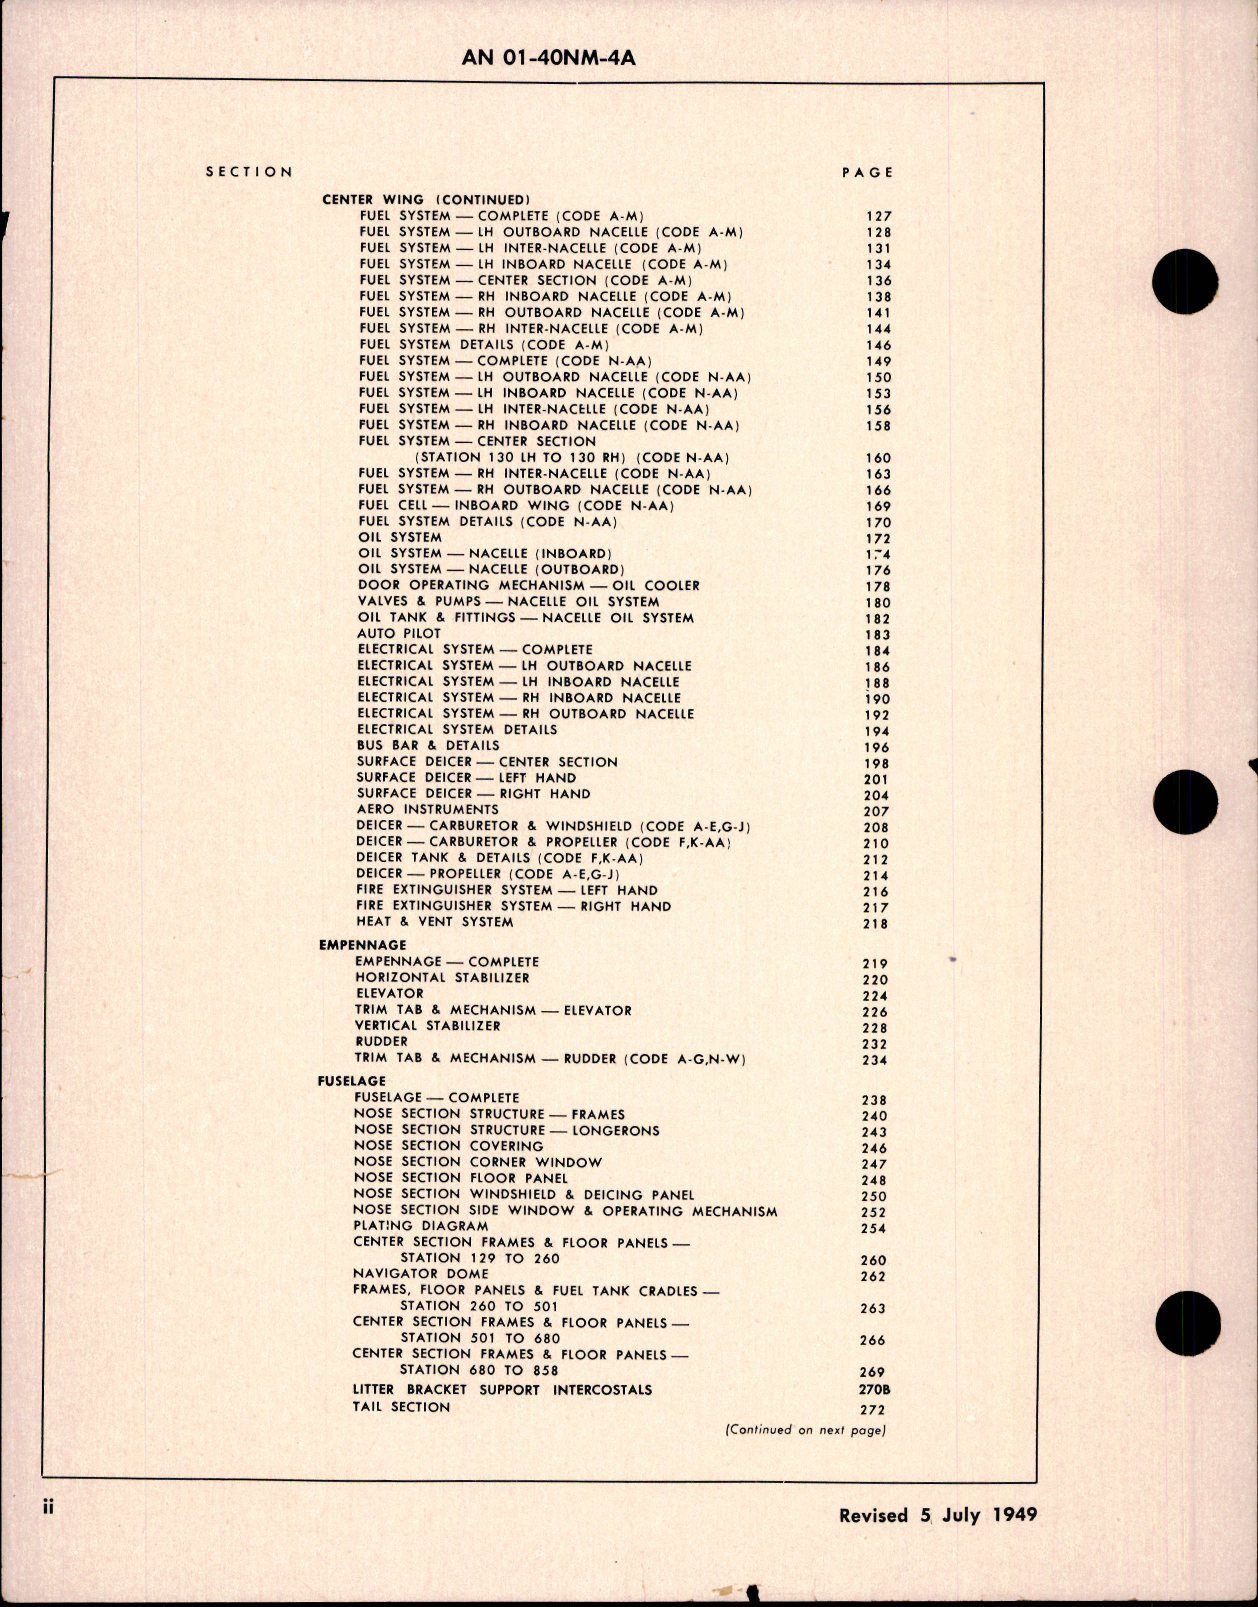 Sample page 6 from AirCorps Library document: Illustrated Parts Breakdown for C-54 and R5D